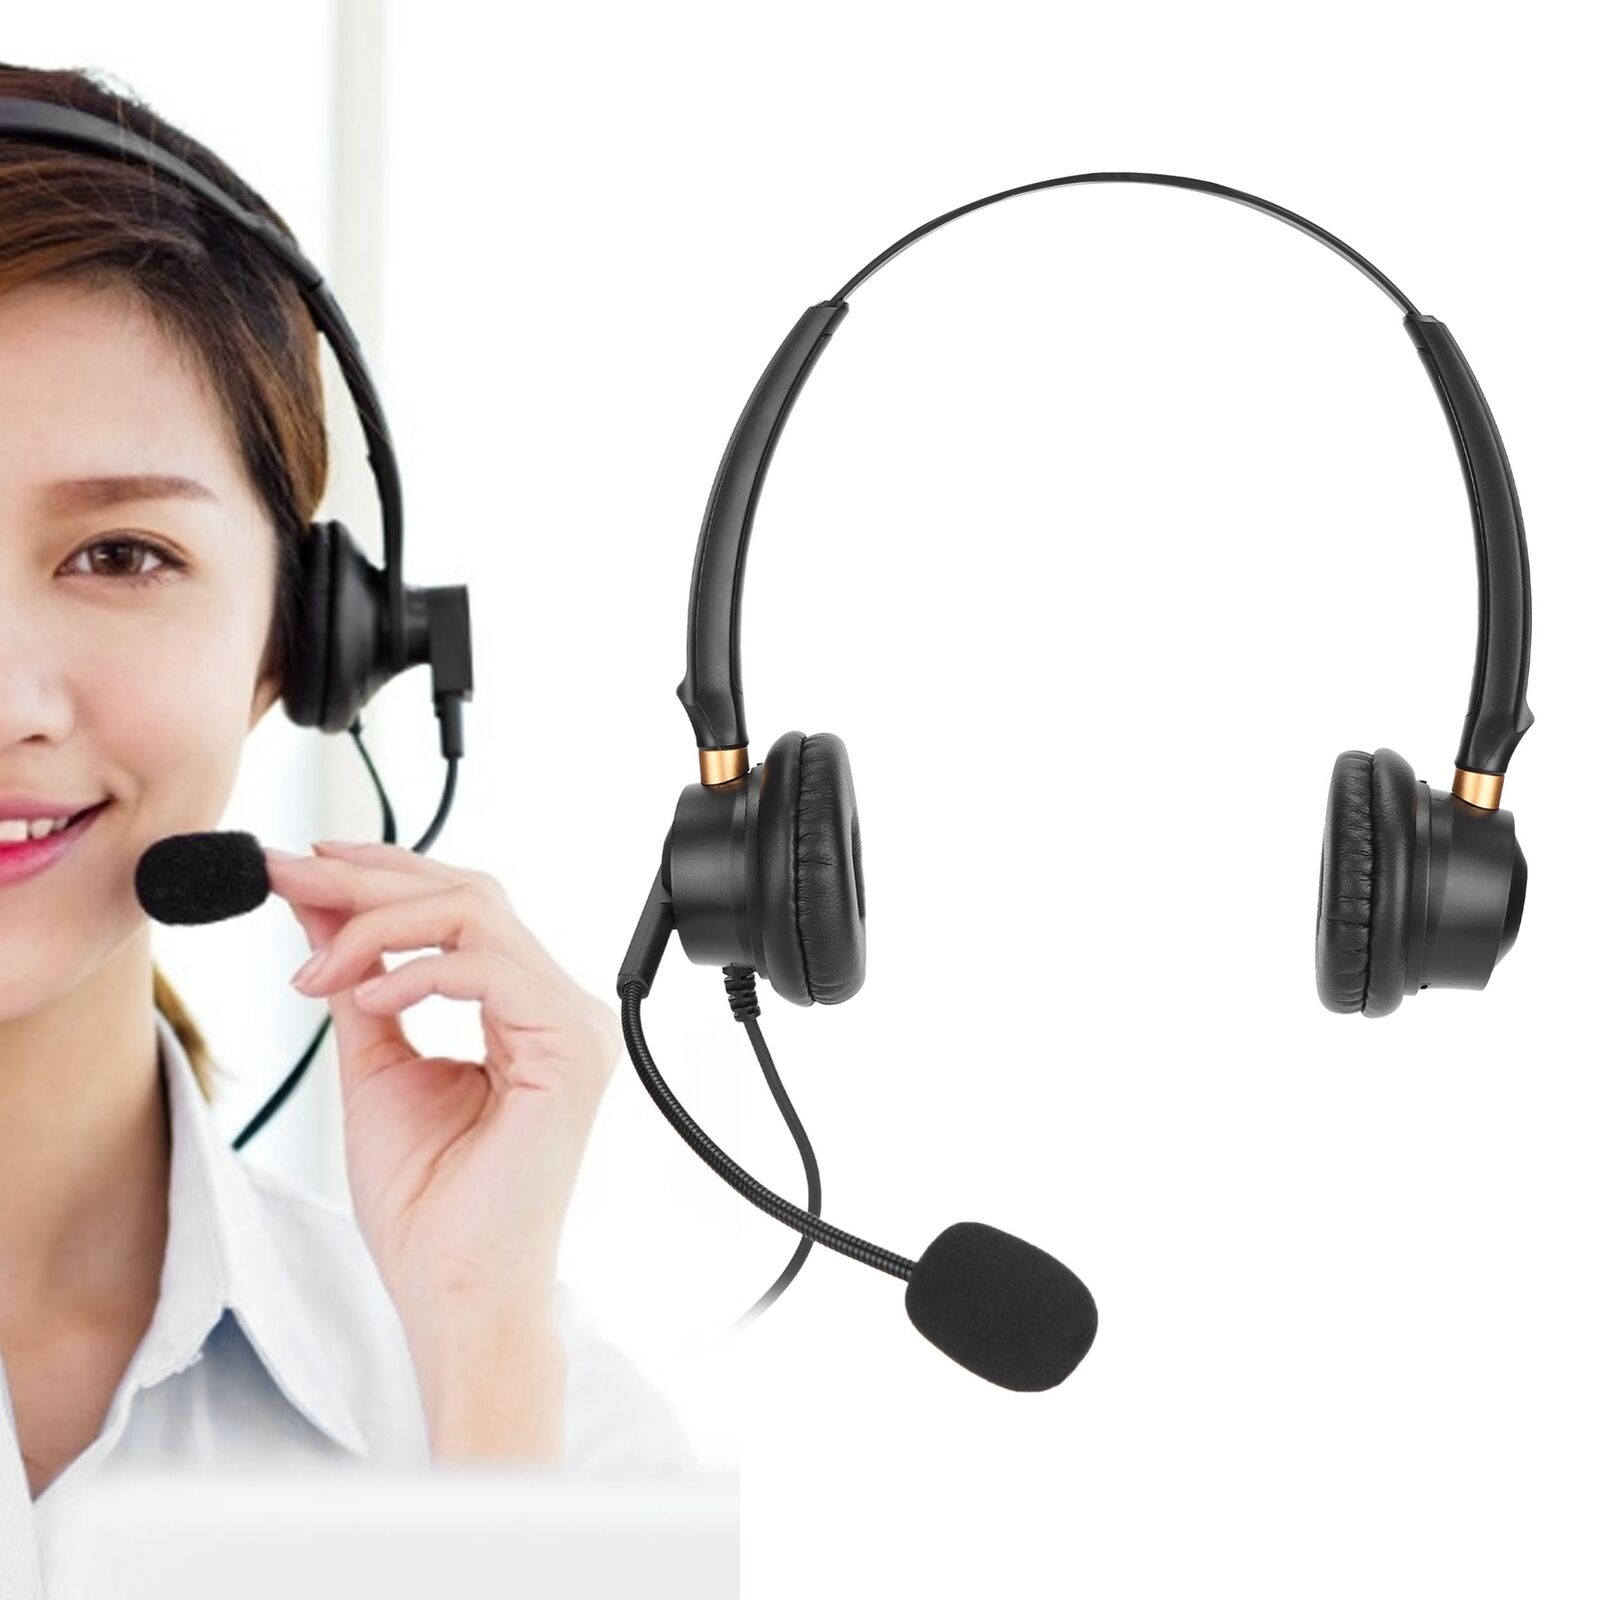 2.5mm Telephone Headset Over Ear Call Center Headphone Noise Reduction With Mic